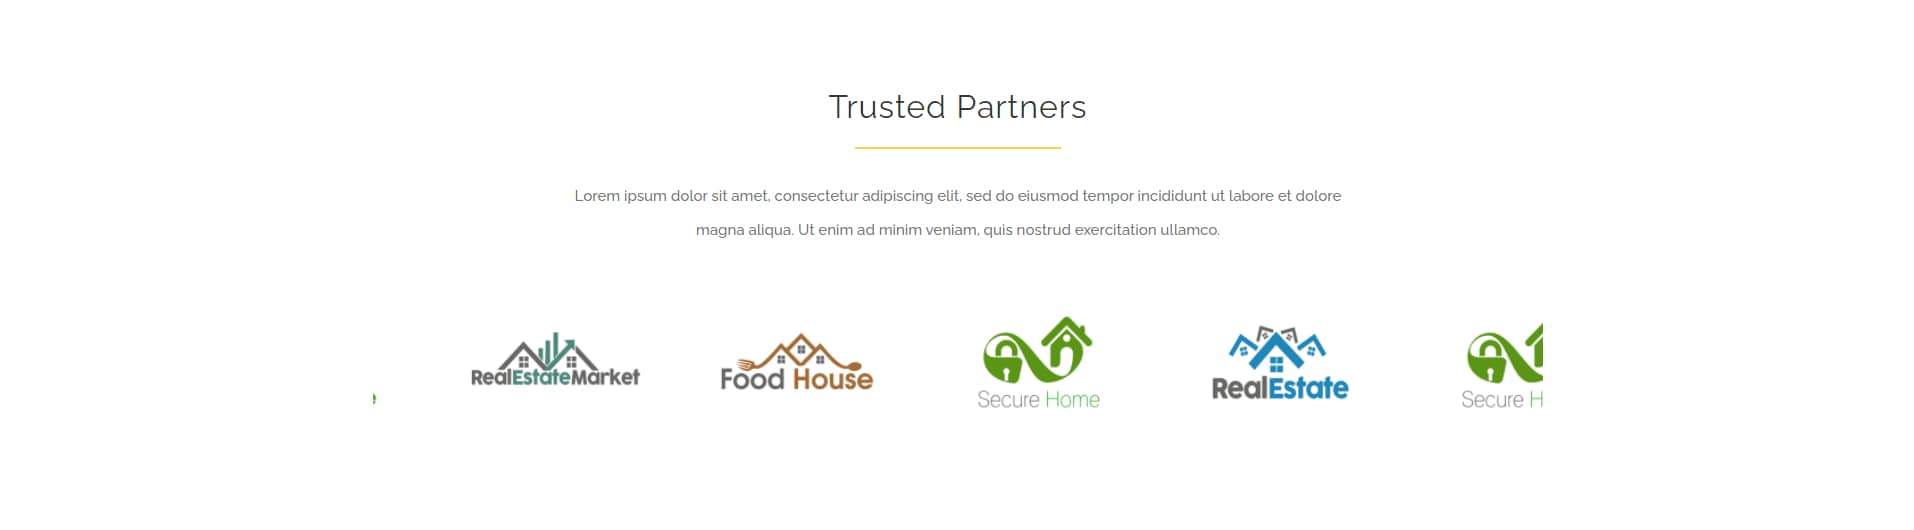 Avada Construction Trusted Partners